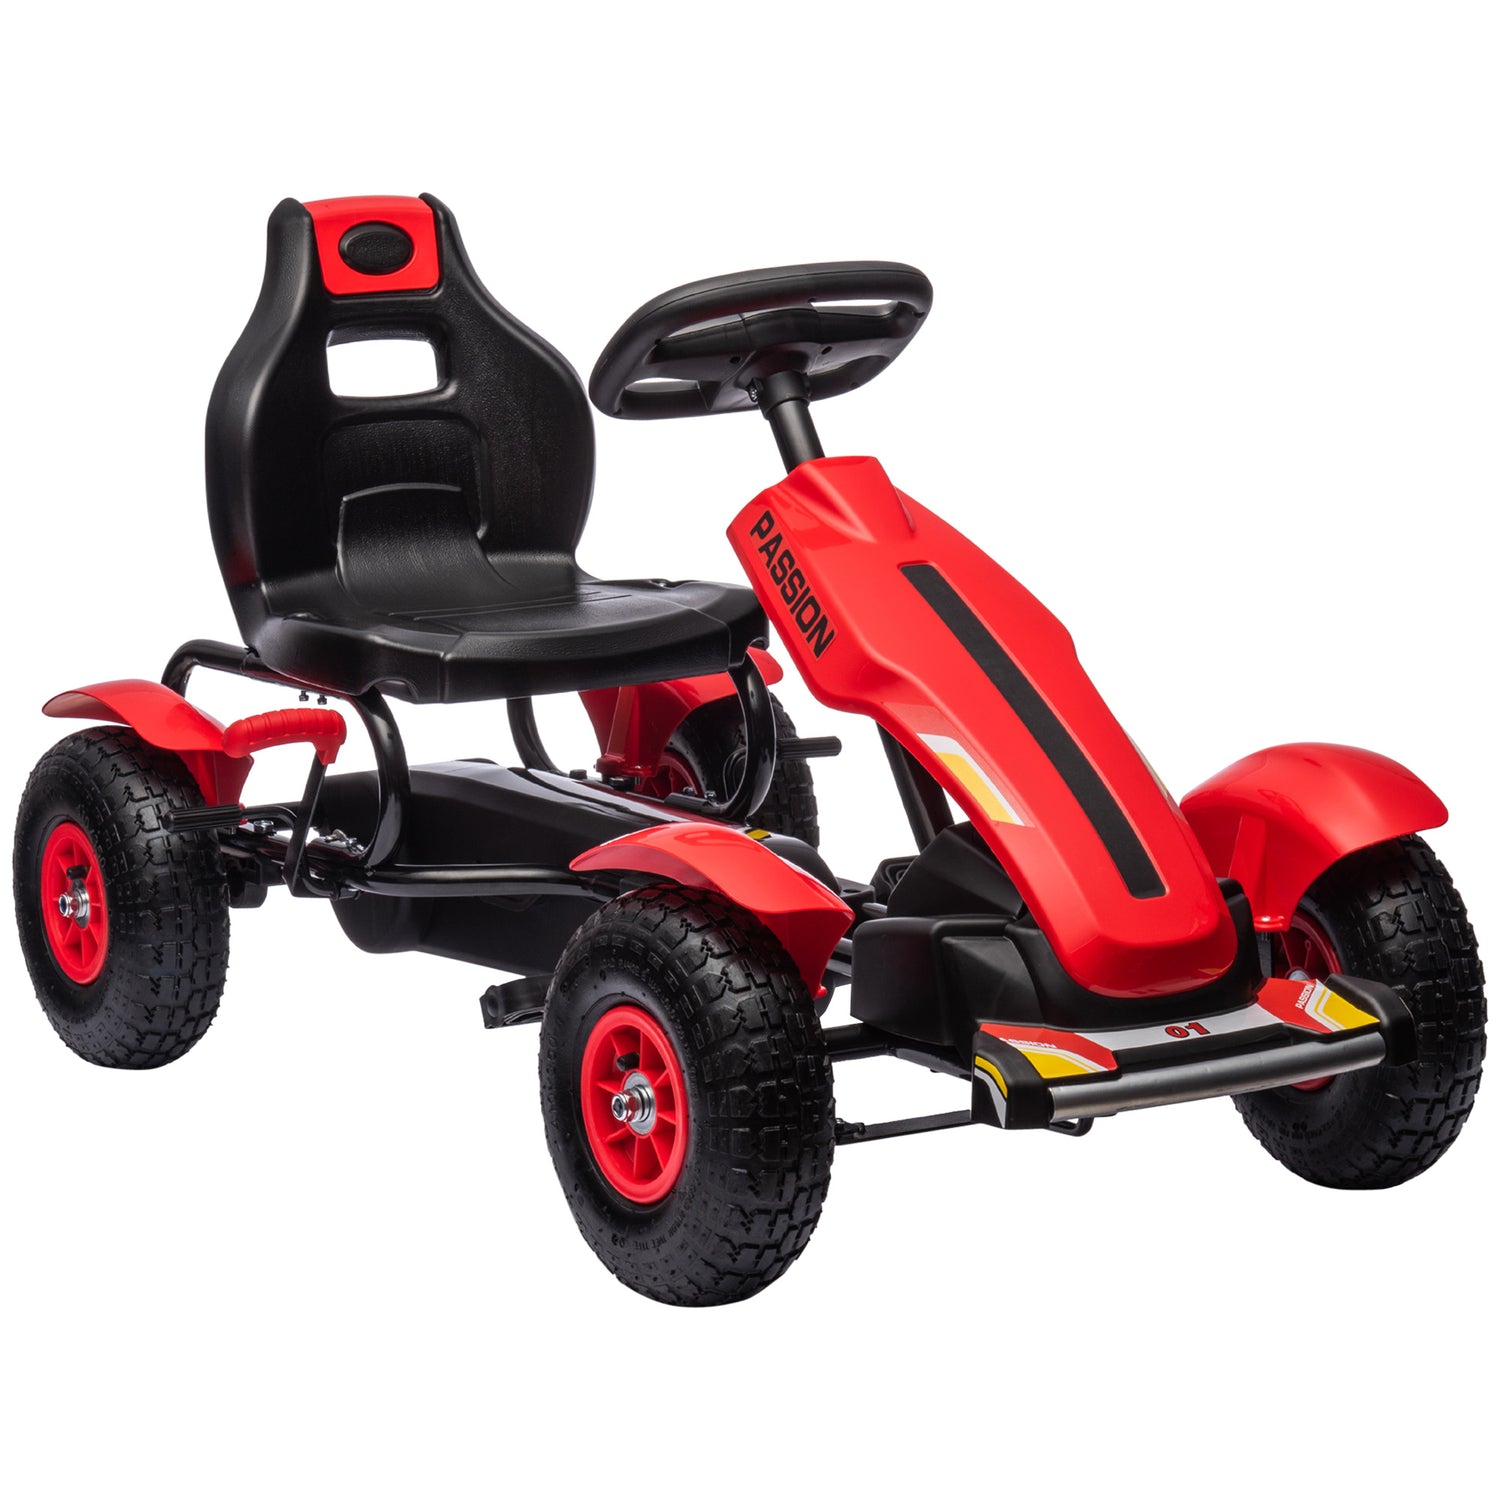 UK's best kids go karts: top pedal go karts tested for two years! »  Shetland's Garden Tool Box